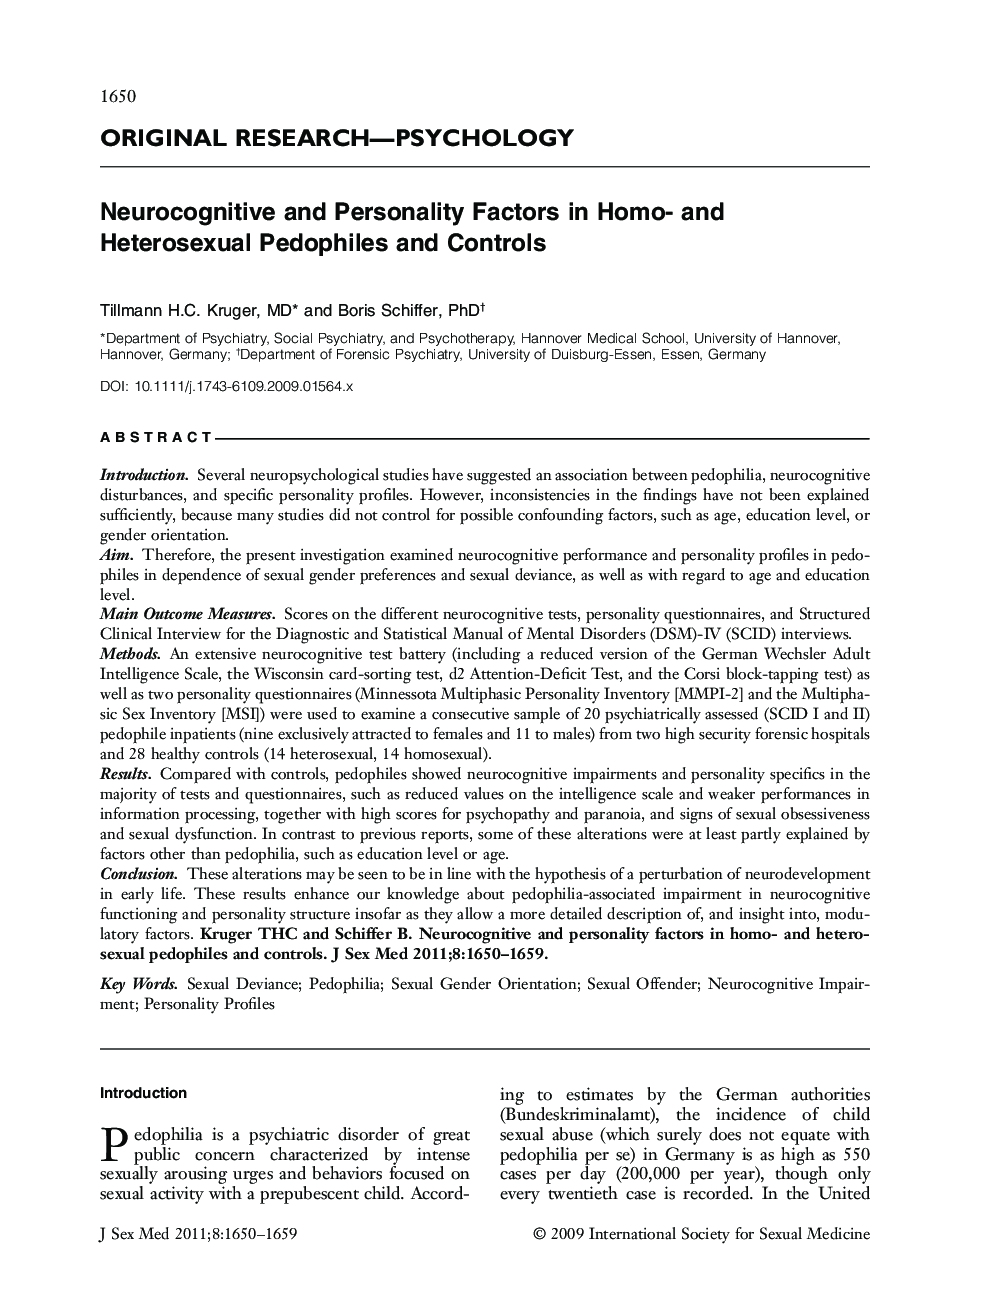 Neurocognitive and Personality Factors in Homo- and Heterosexual Pedophiles and Controls